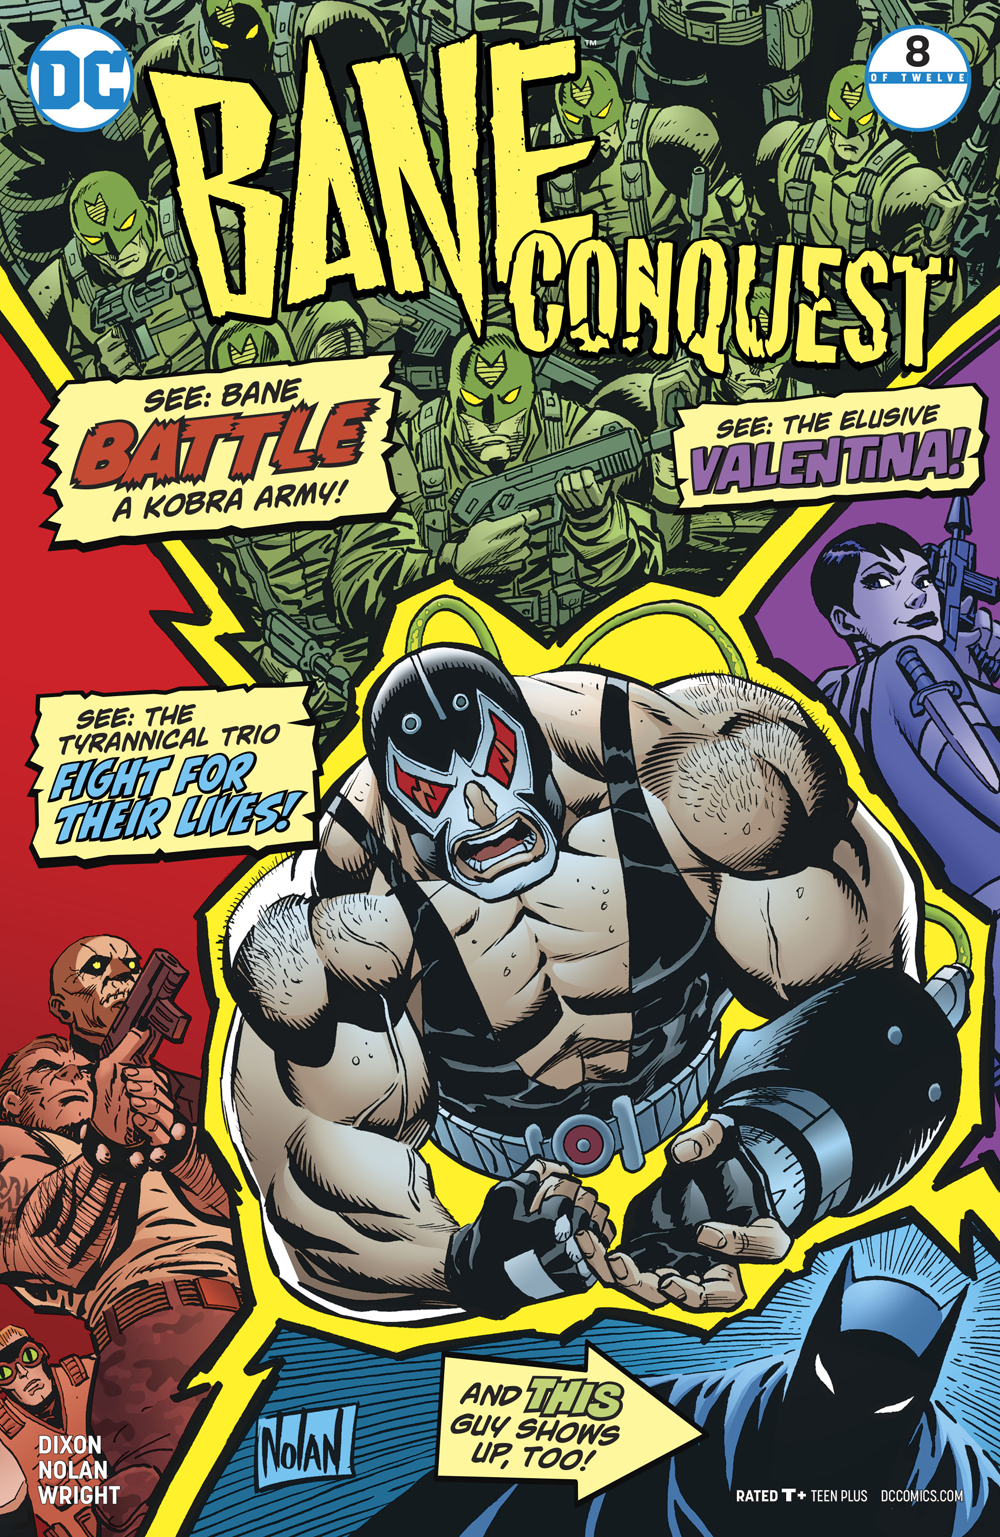 BANE CONQUEST #8 (OF 12)